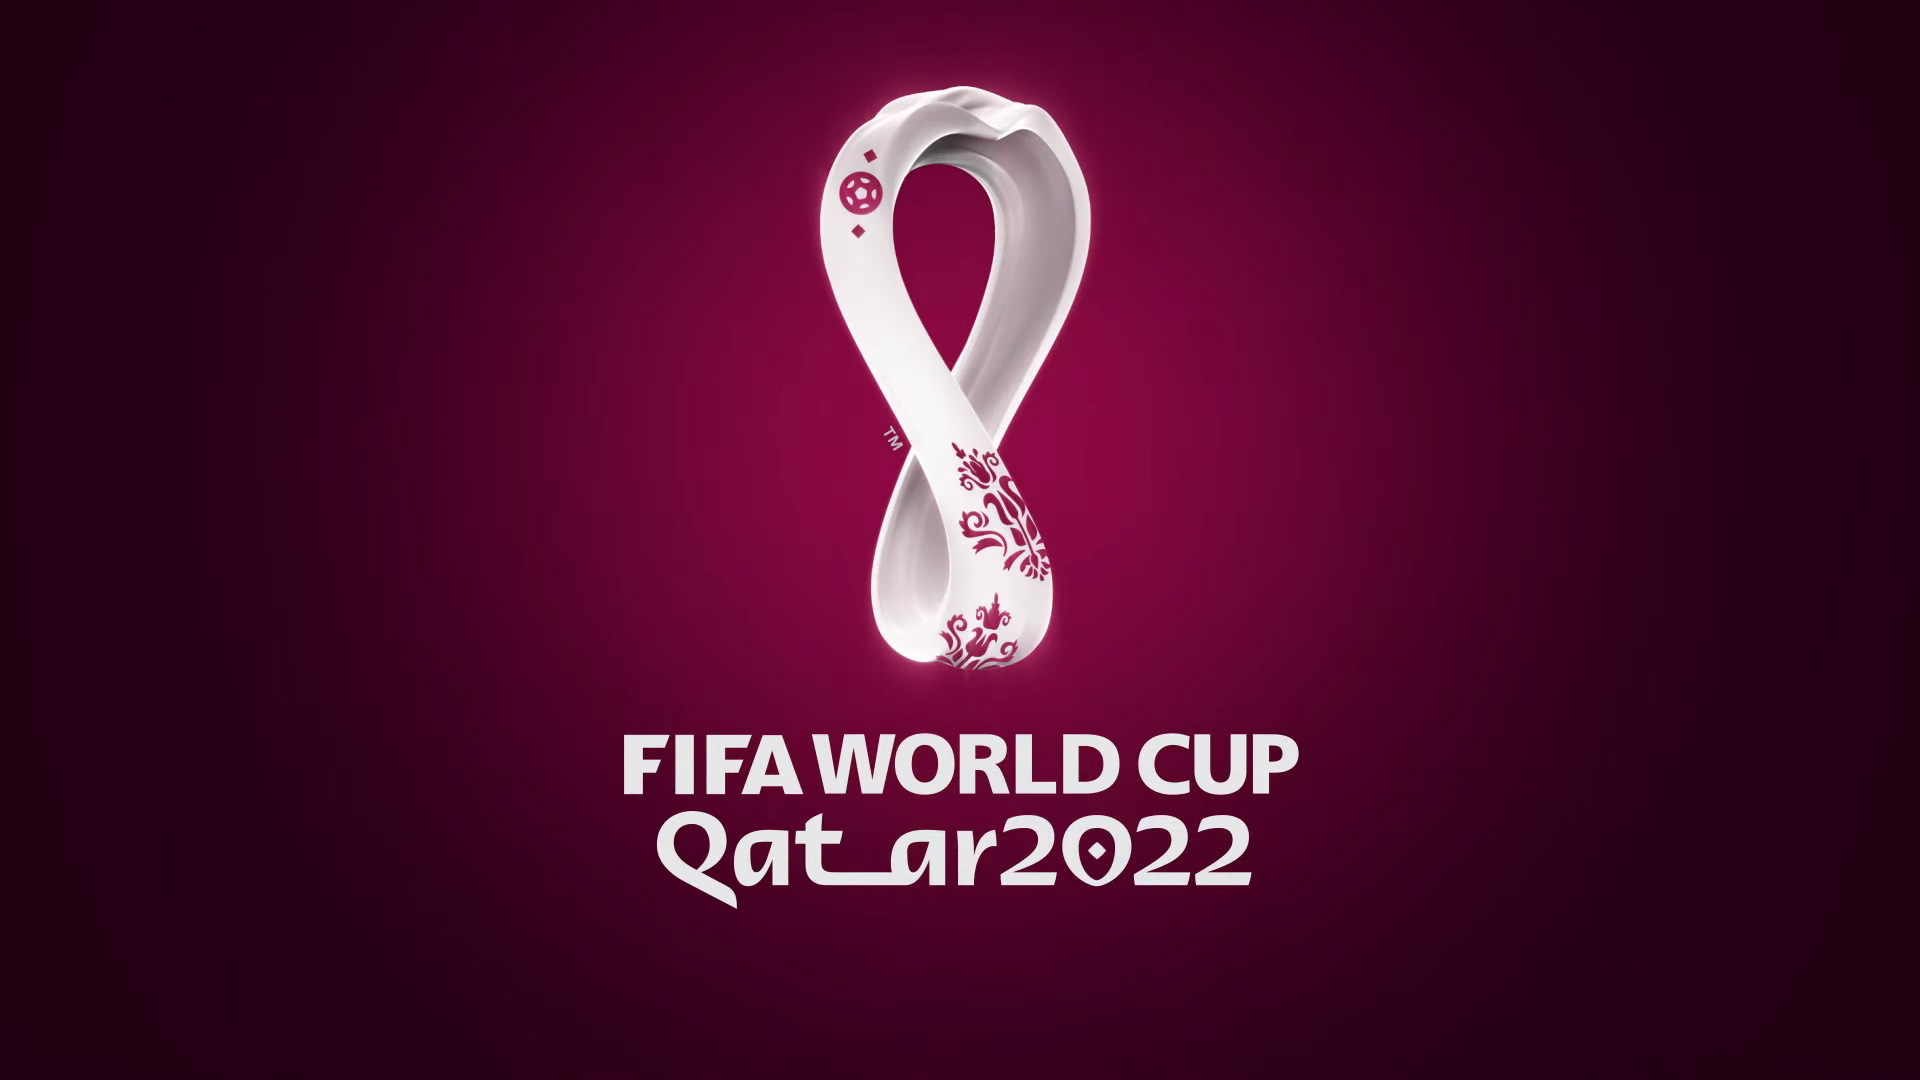 TOP THINGS TO KNOW ABOUT THE UPCOMING WORLD CUP 2022 AT QATAR